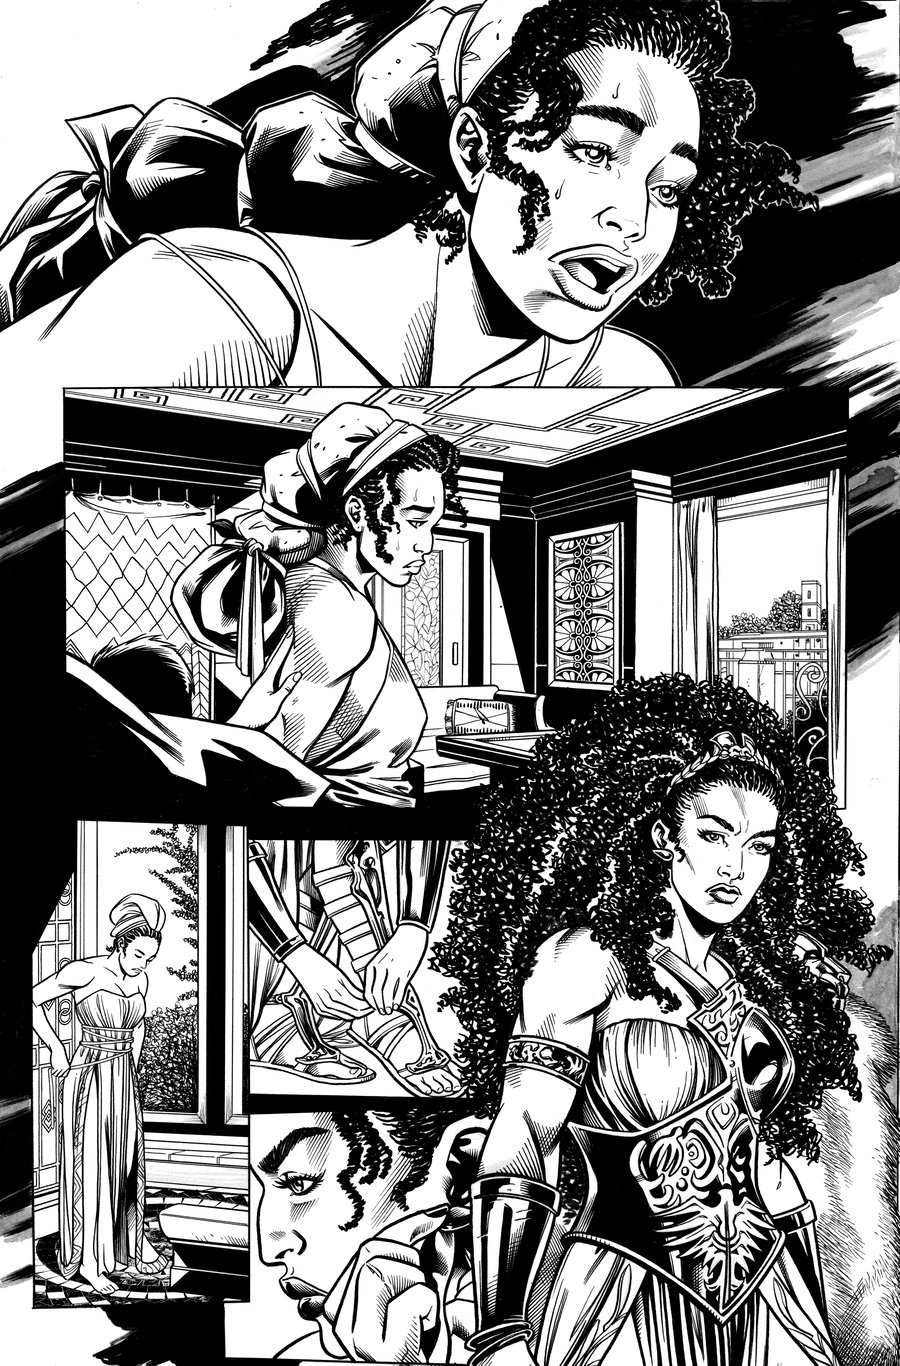 Image of Nubia and the Amazons #1 PG 04